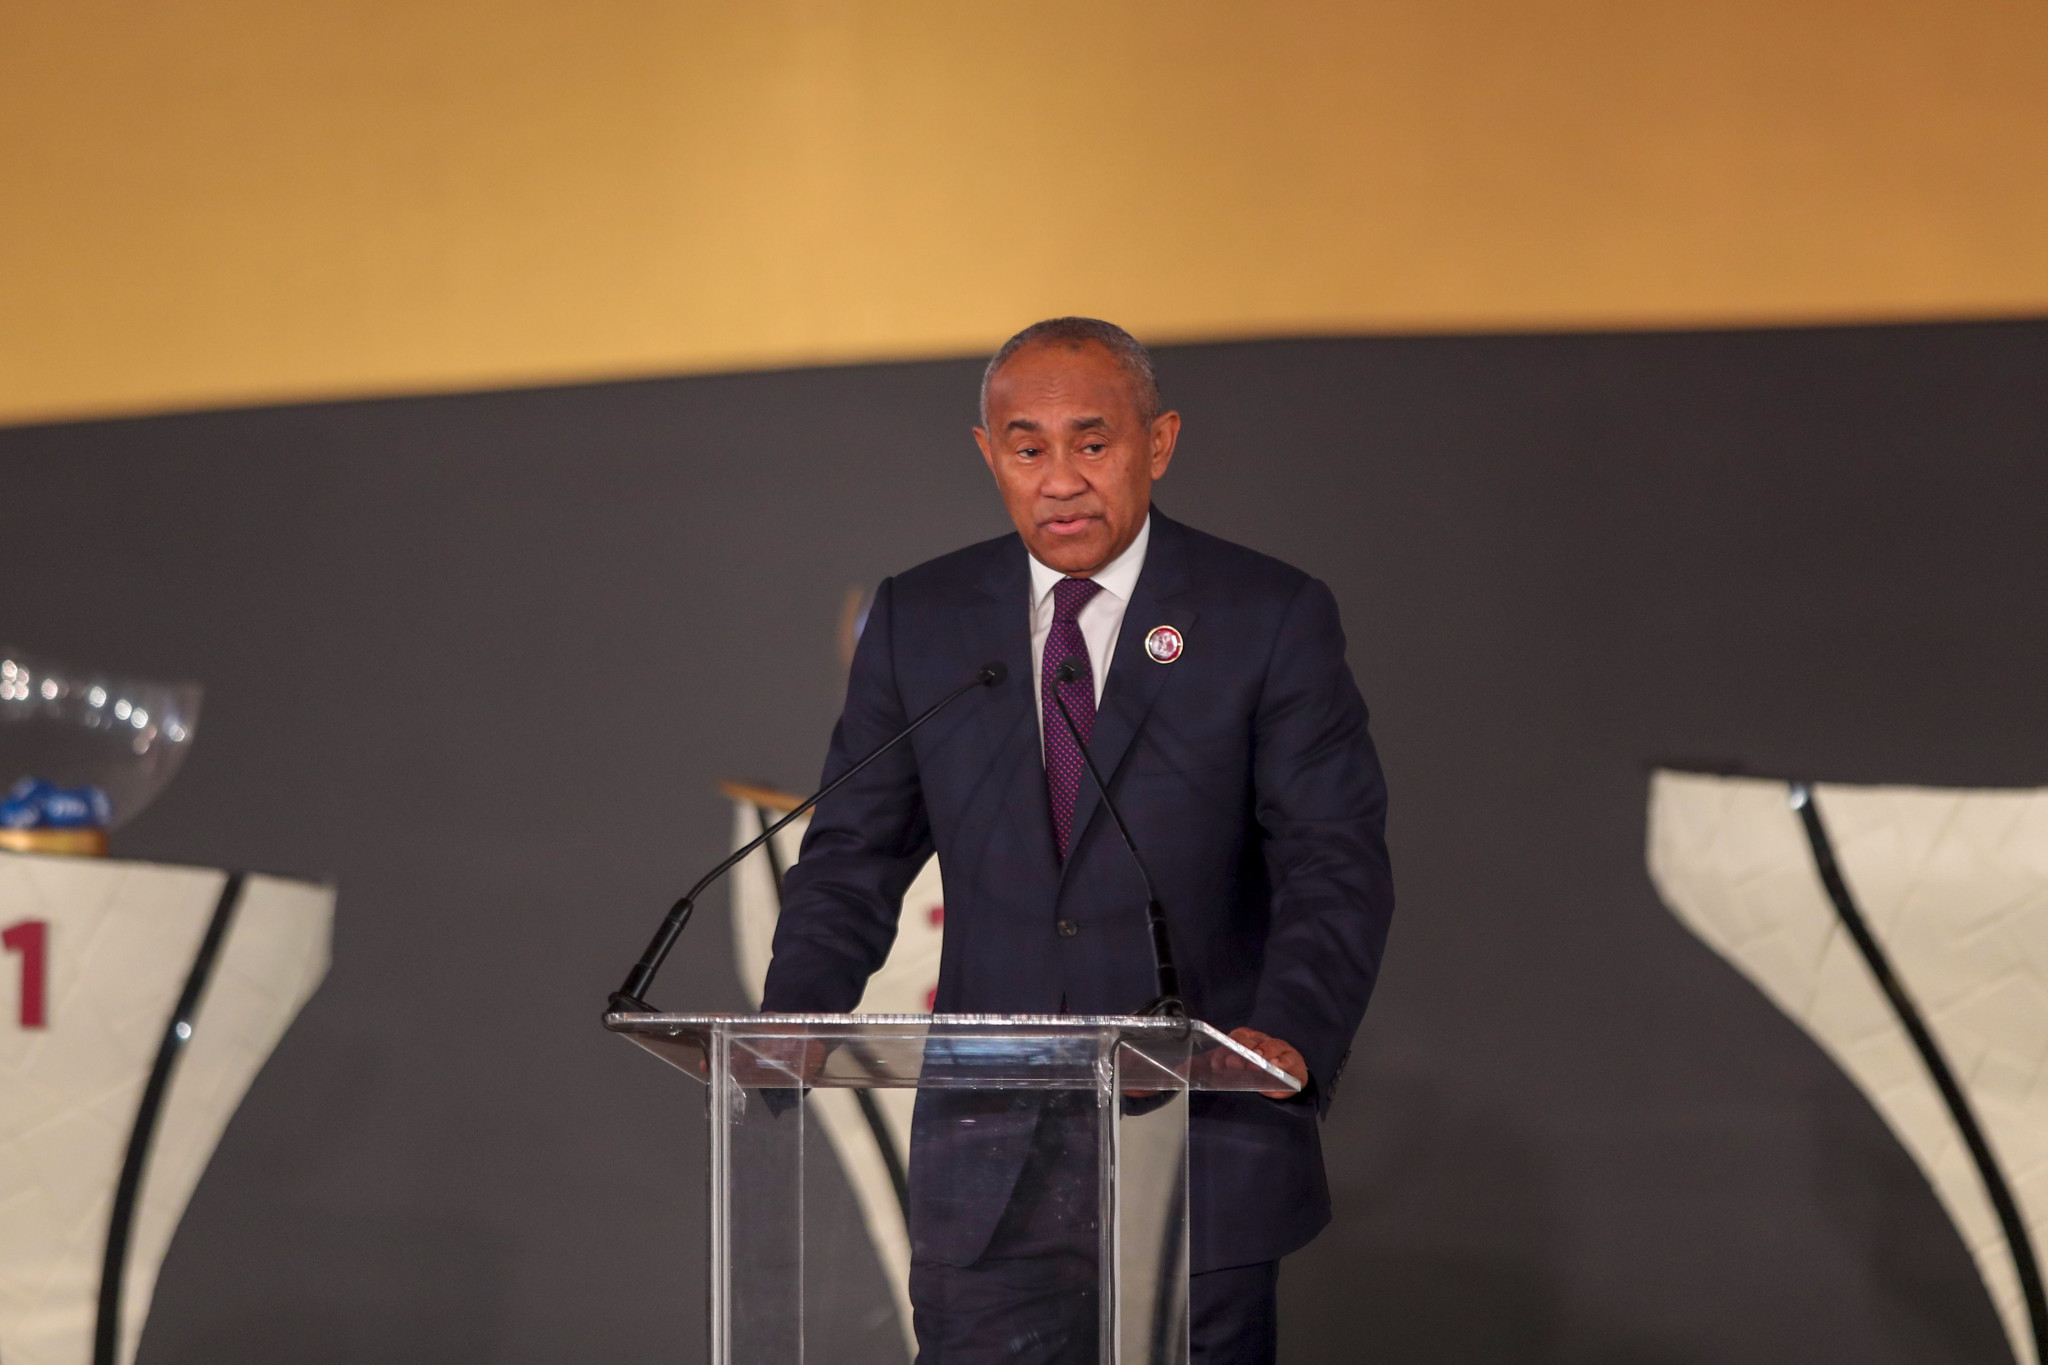 Ahmad will seek a second term as CAF President ©Getty Images